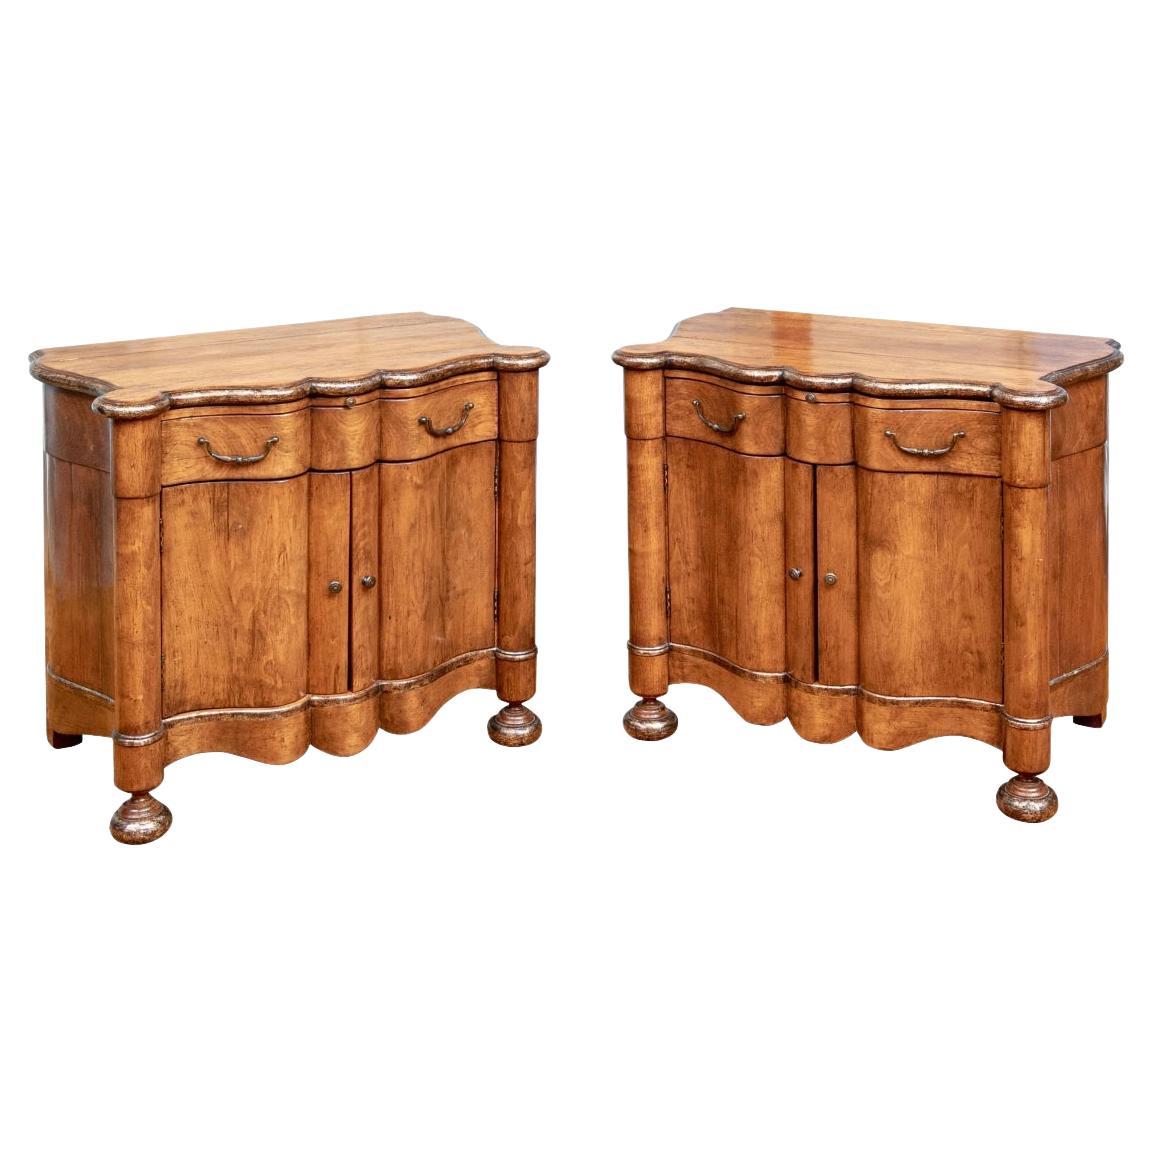 Pair Of Custom Netherlands Cabinets By Gregorius Pineo 2001 For Sale